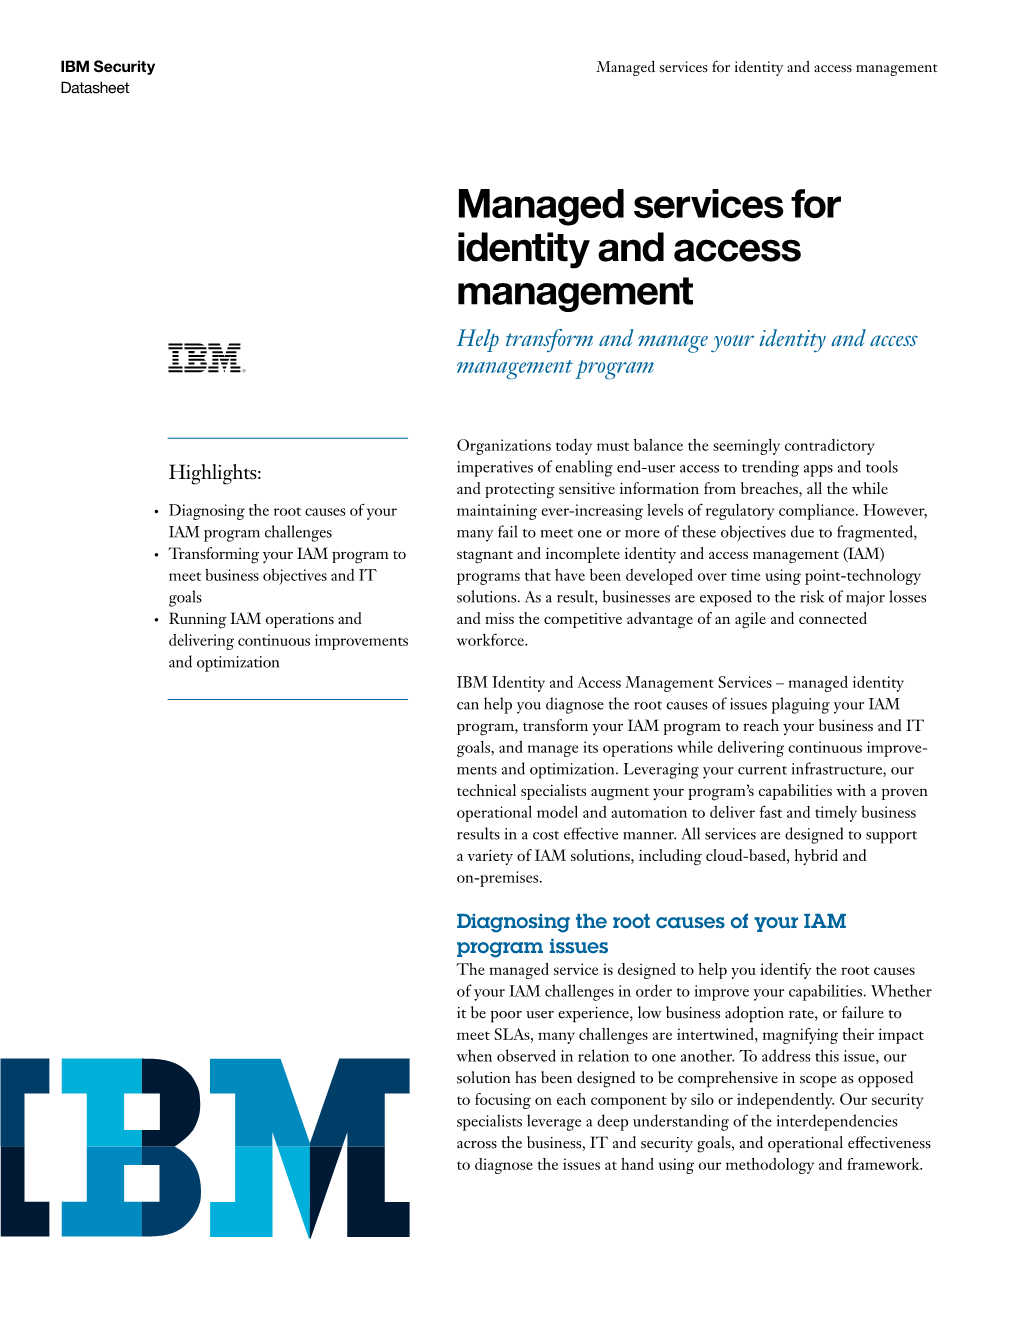 Managed Services for Identity and Access Management Datasheet